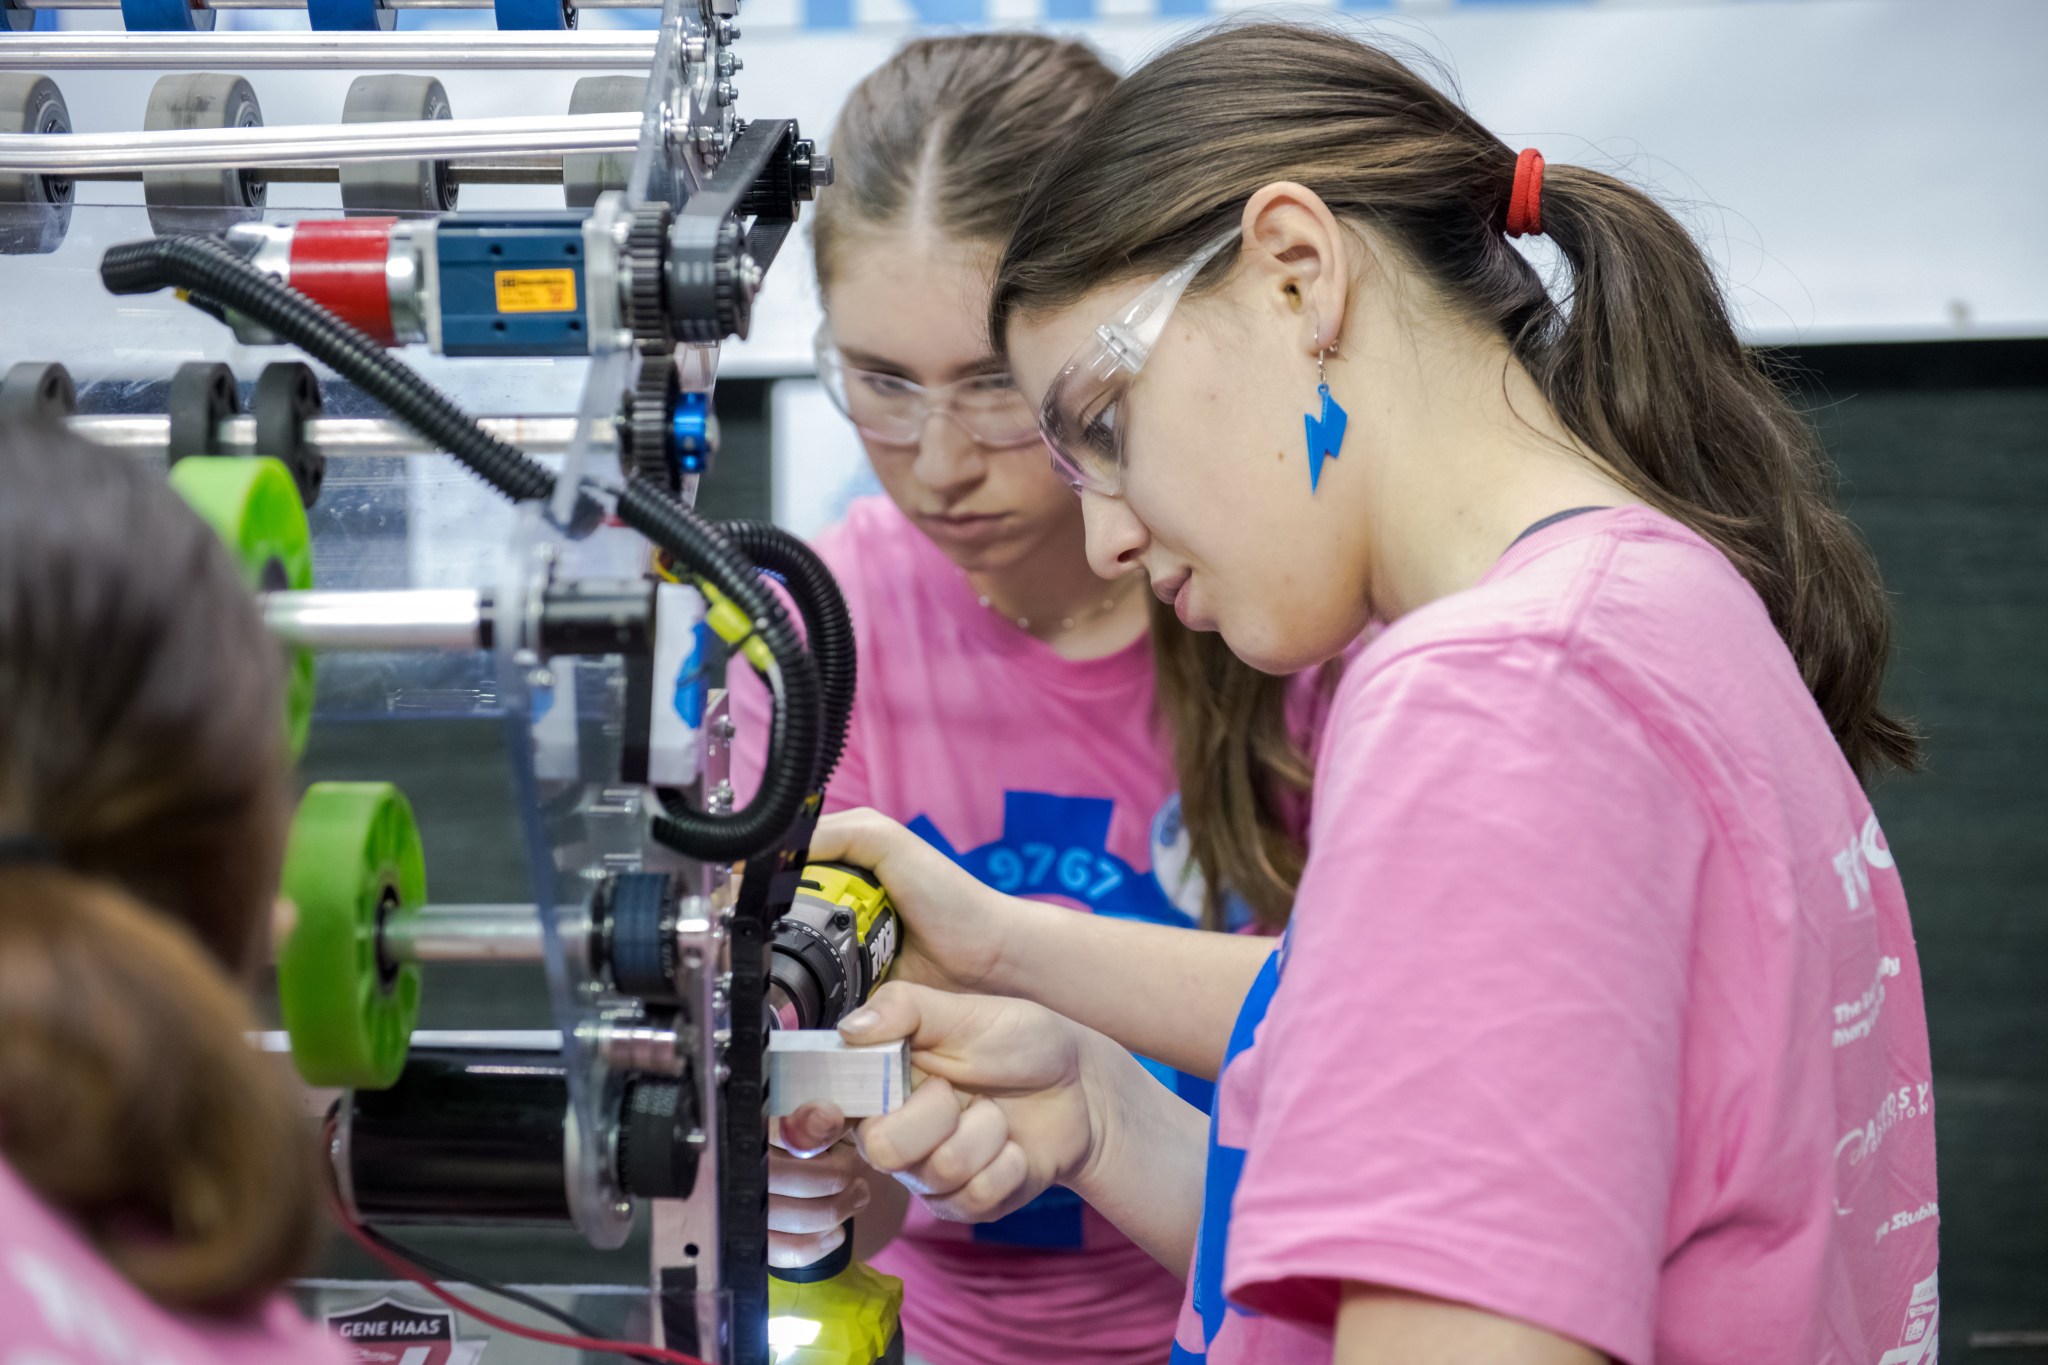 Two teenage girls in pink T-shirts adjust their robot.